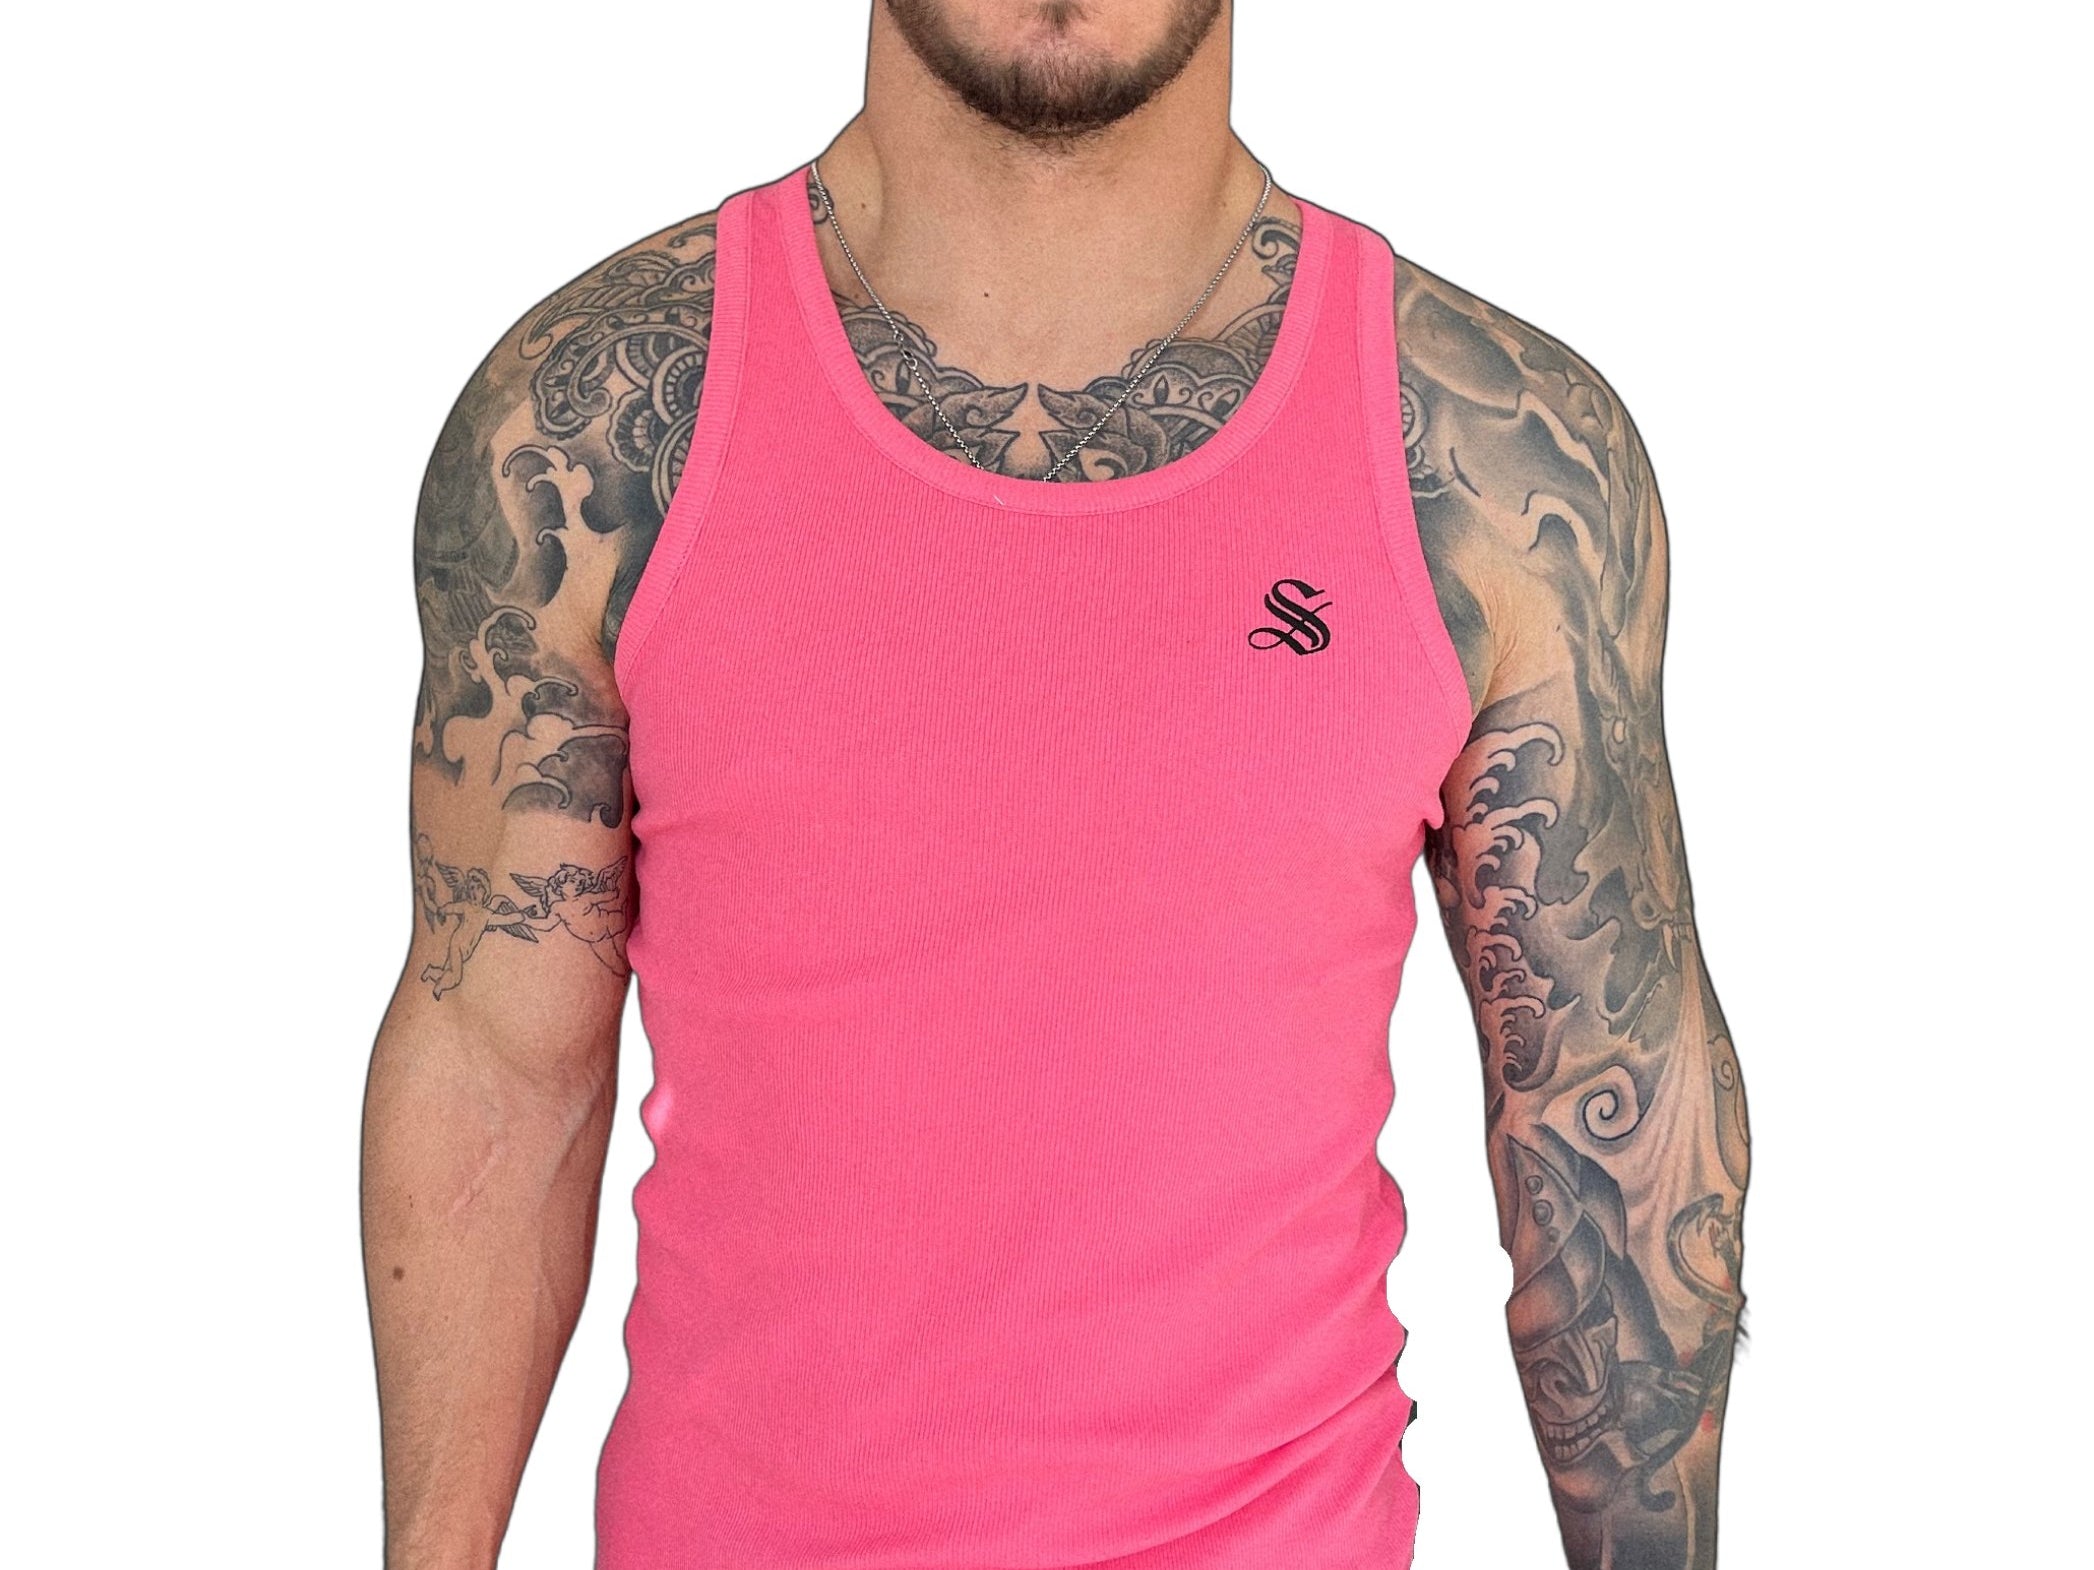 Nosilio - Pink Tank Top for Men - Sarman Fashion - Wholesale Clothing Fashion Brand for Men from Canada